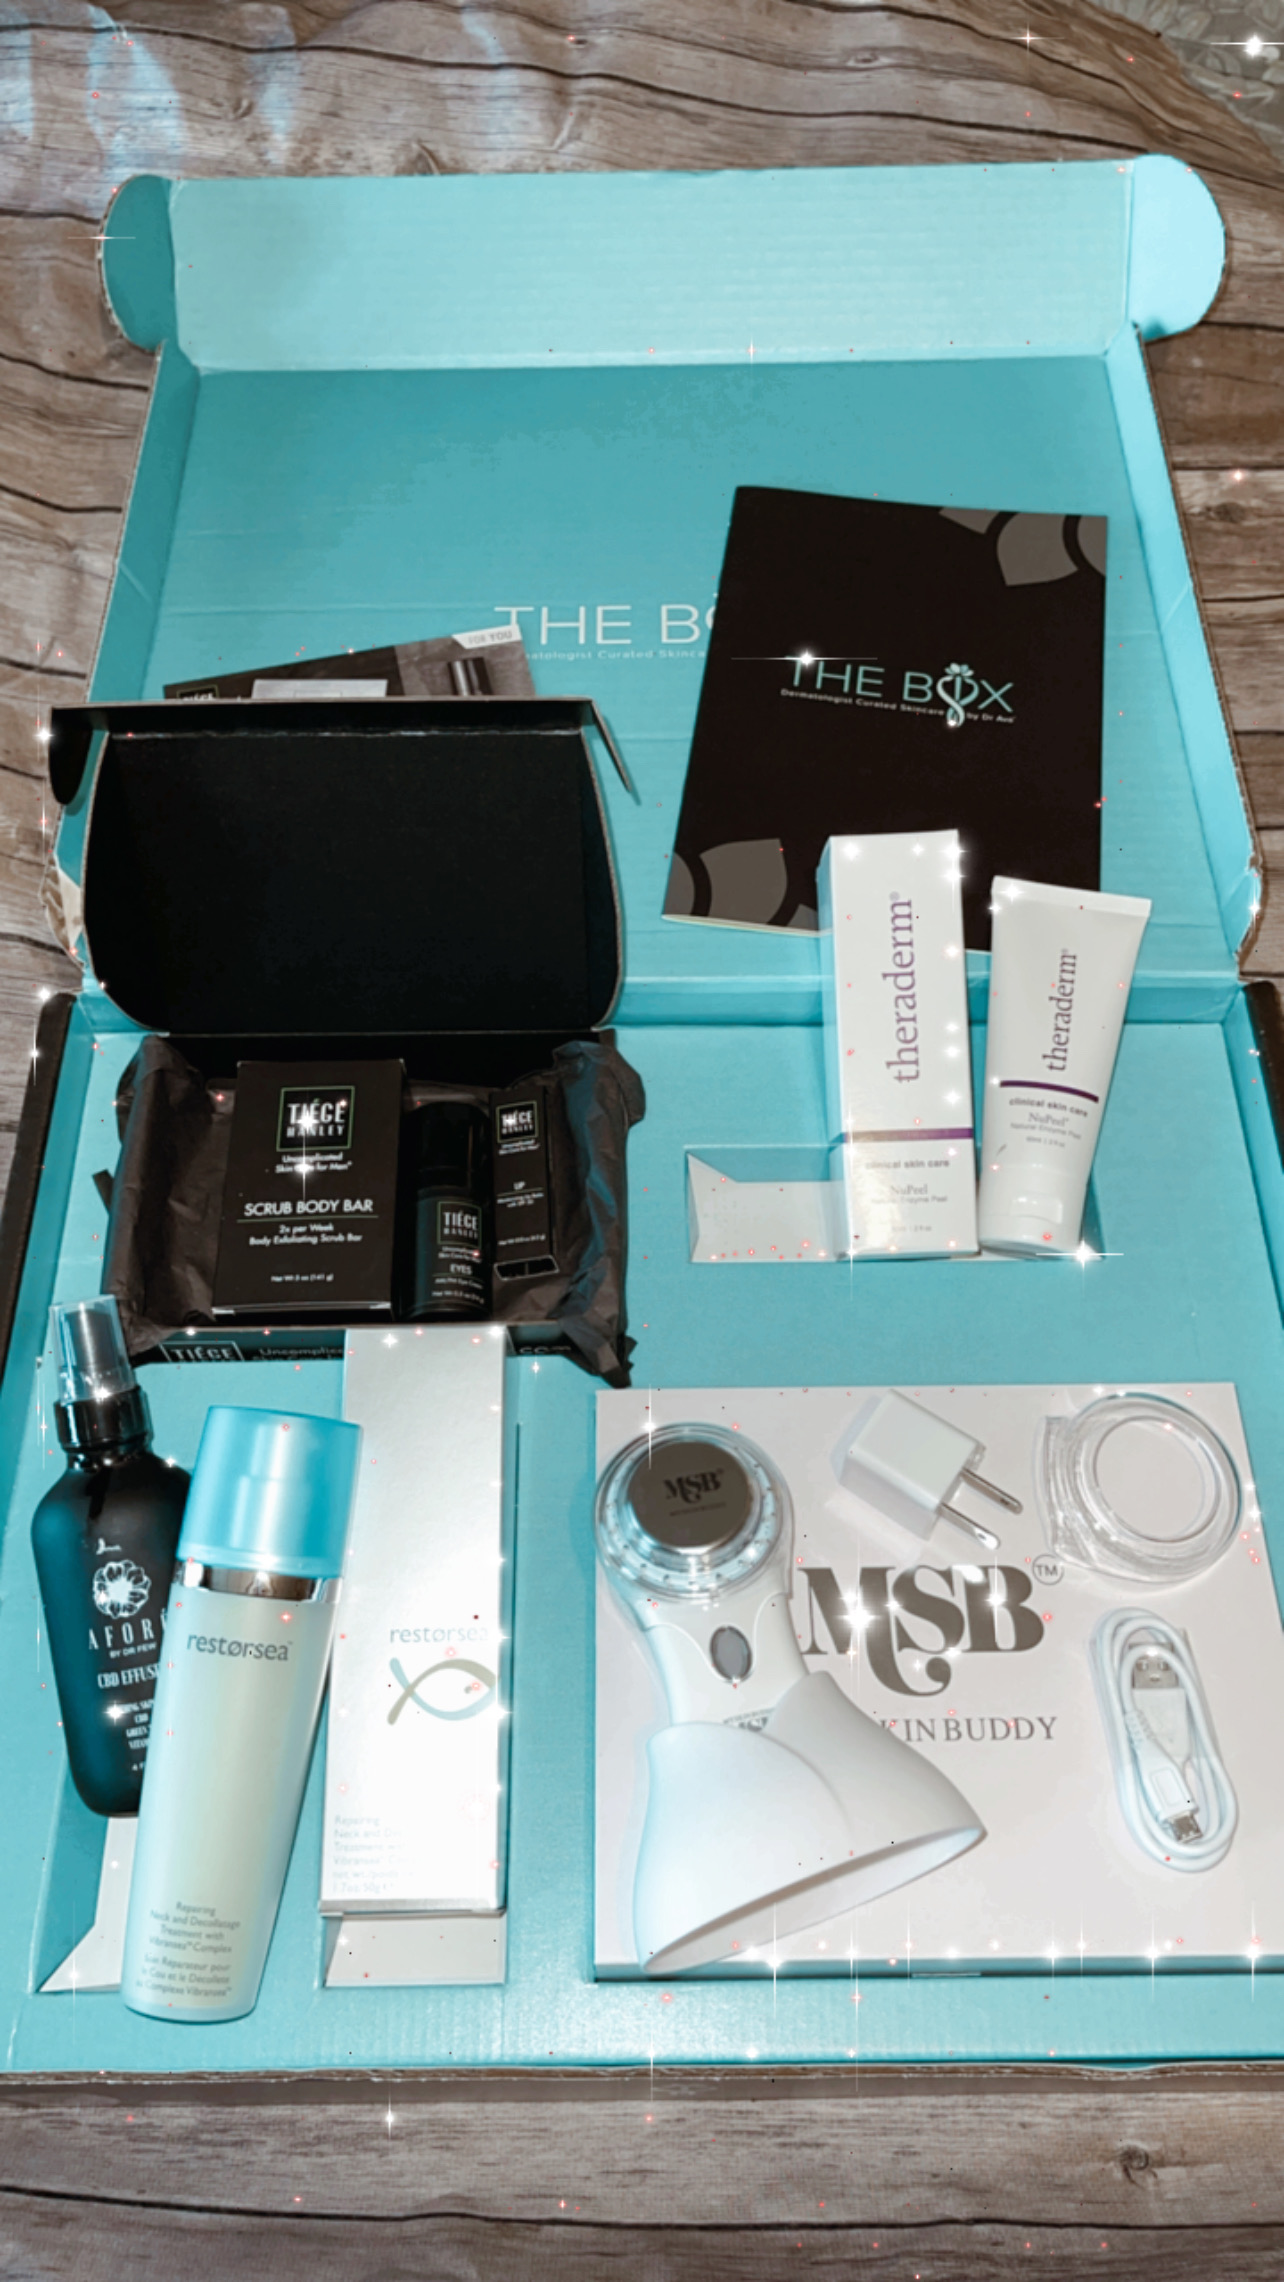 The Box by Dr. Ava: A Dermatologist-Curated Subscription Box